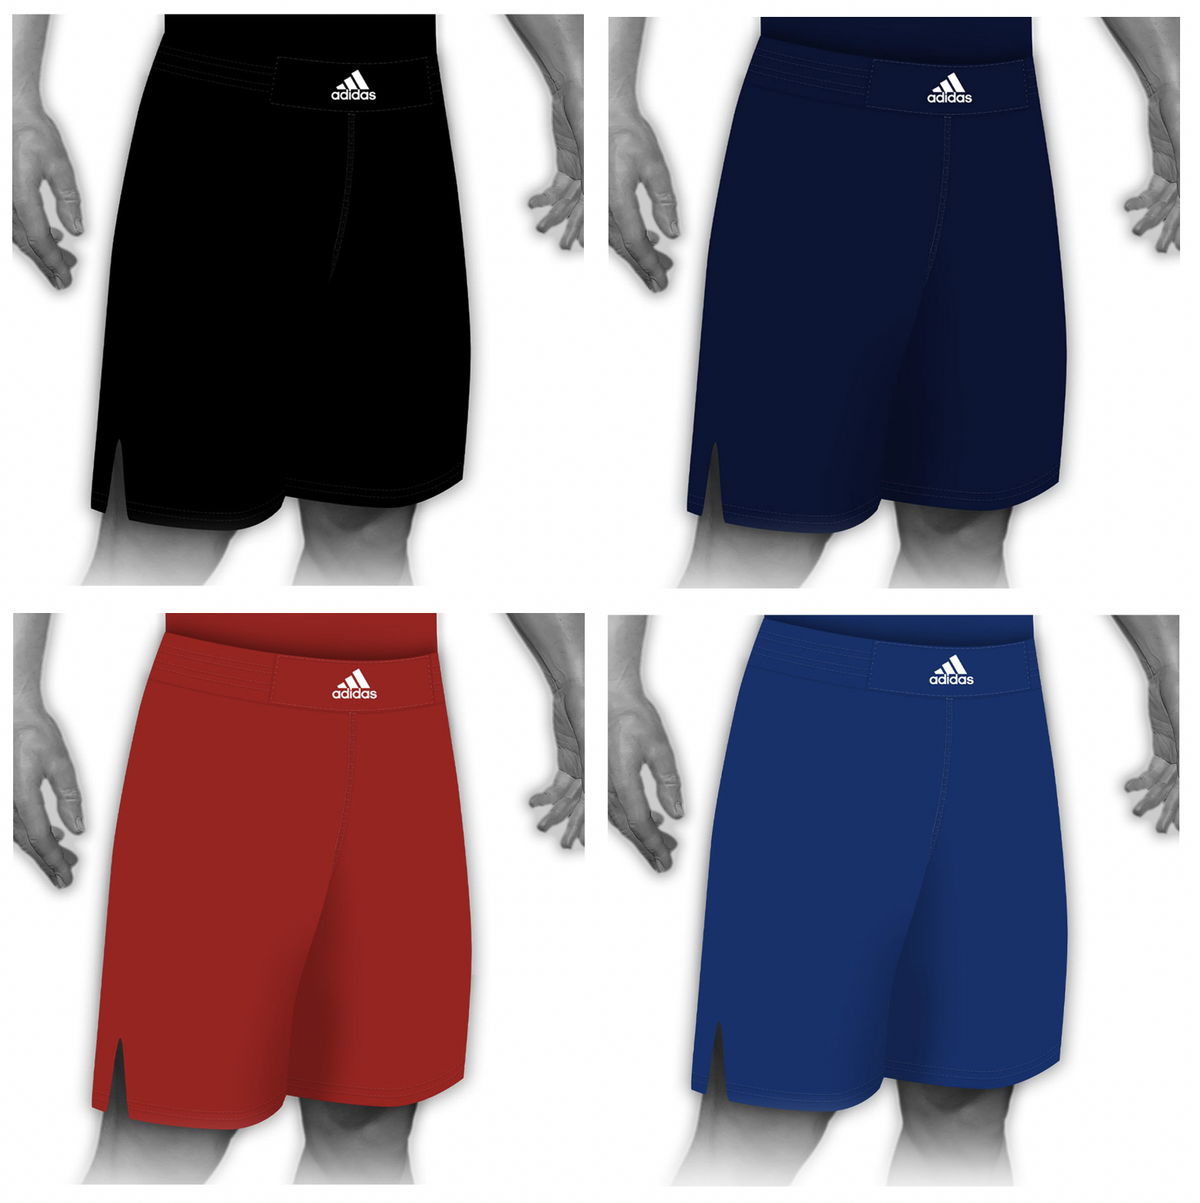 adidas | aA202s | Stock Competition Shorts - Great Call Athletics